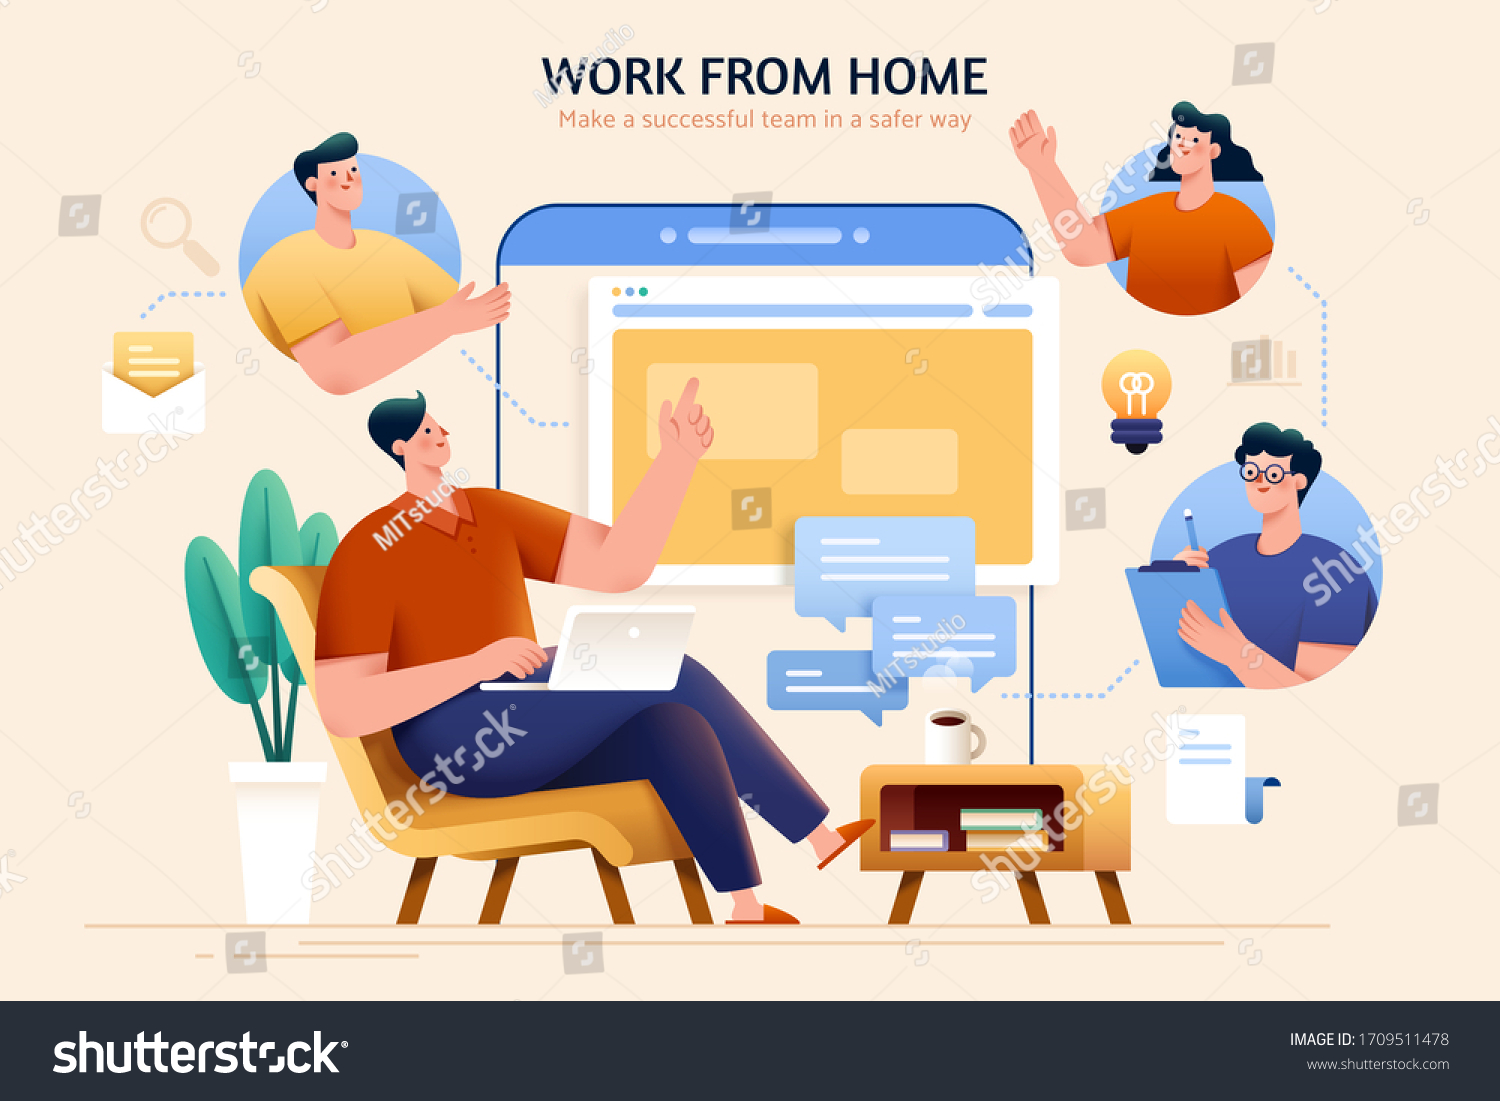 Concept of telecommuting and work from home, designed with a team discussing wonderful ideas through online meeting and maintaining their productivity #1709511478